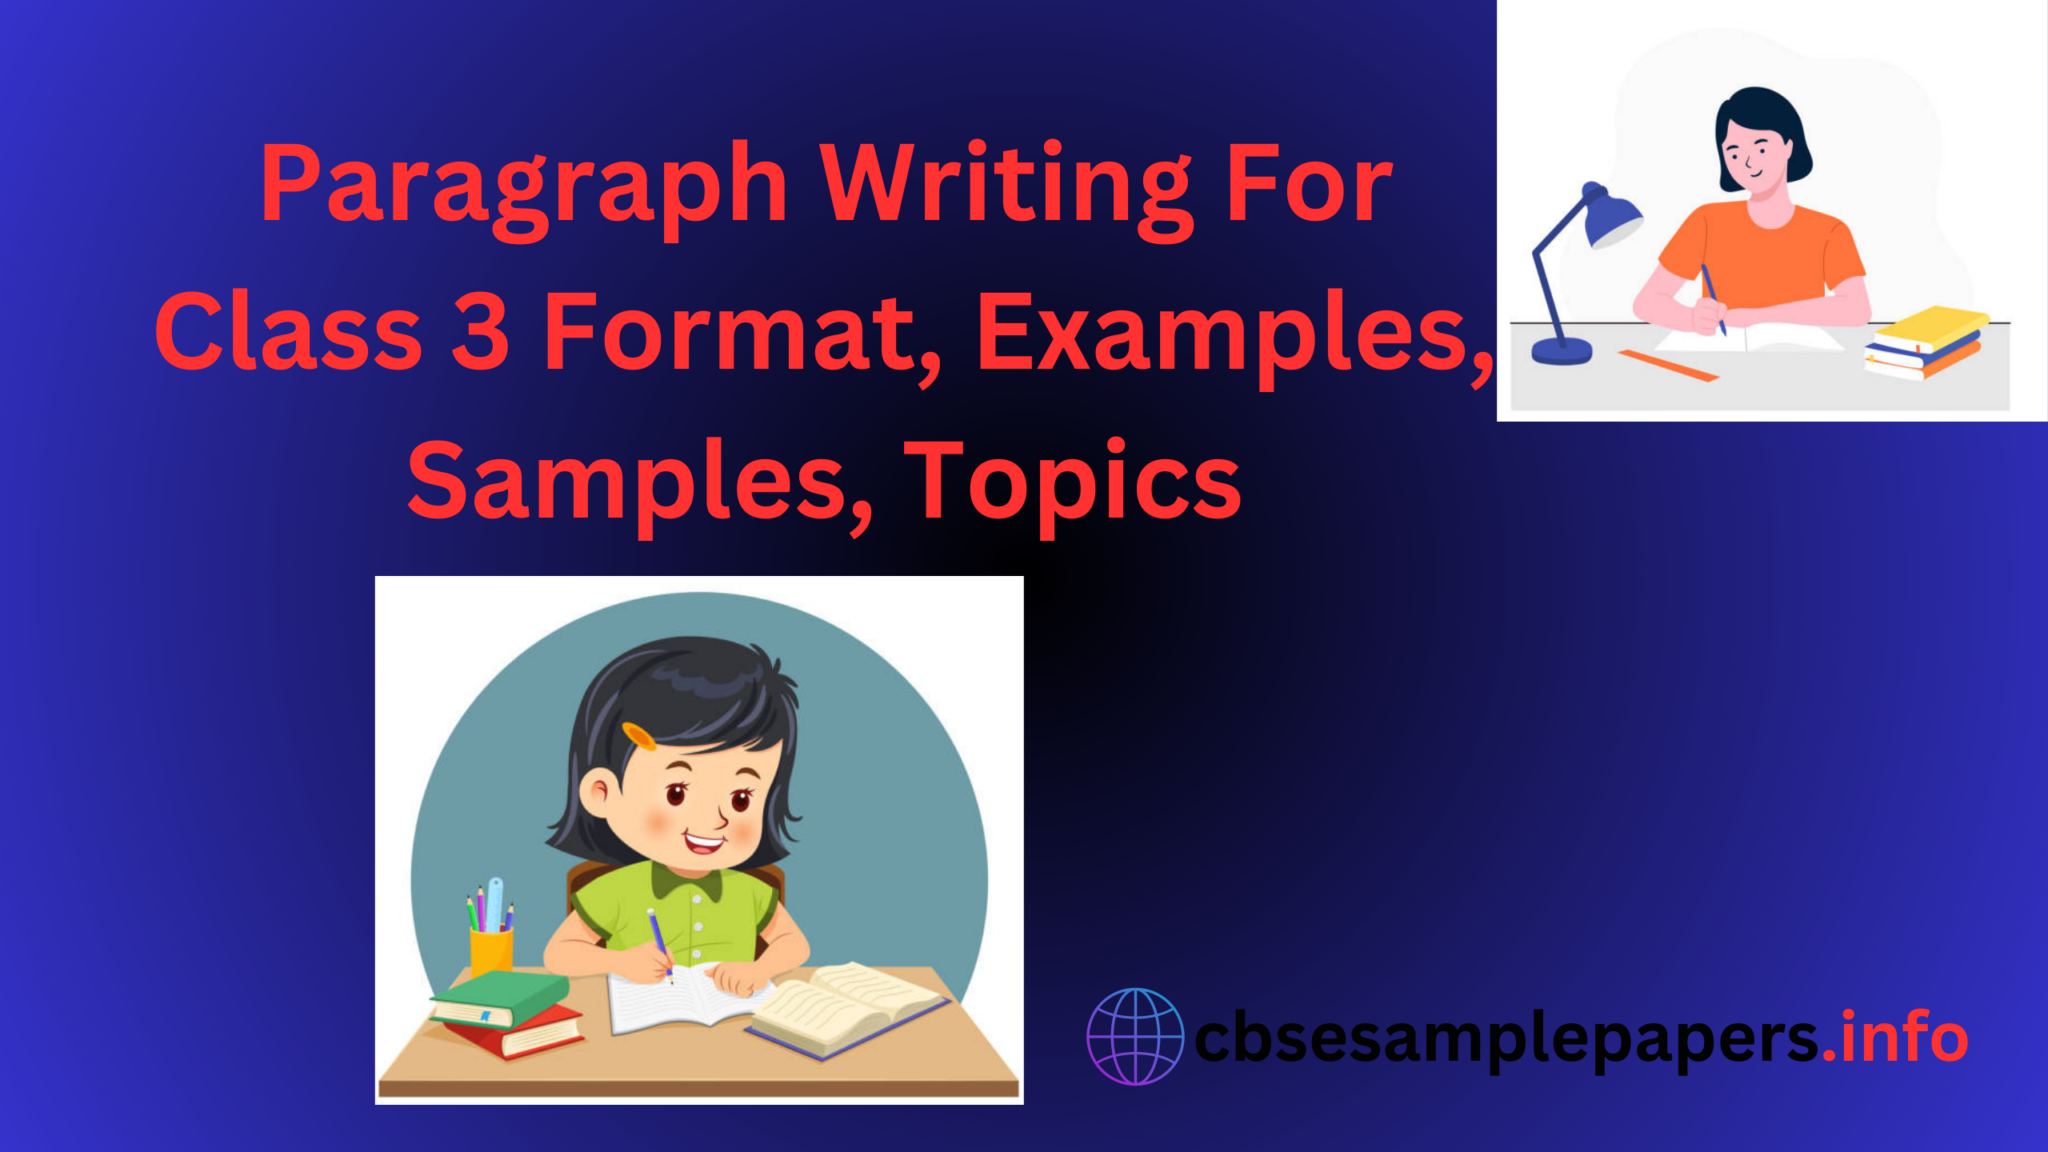 Paragraph Writing For Class 3 Format, Examples, Samples, Topics - CBSE ...